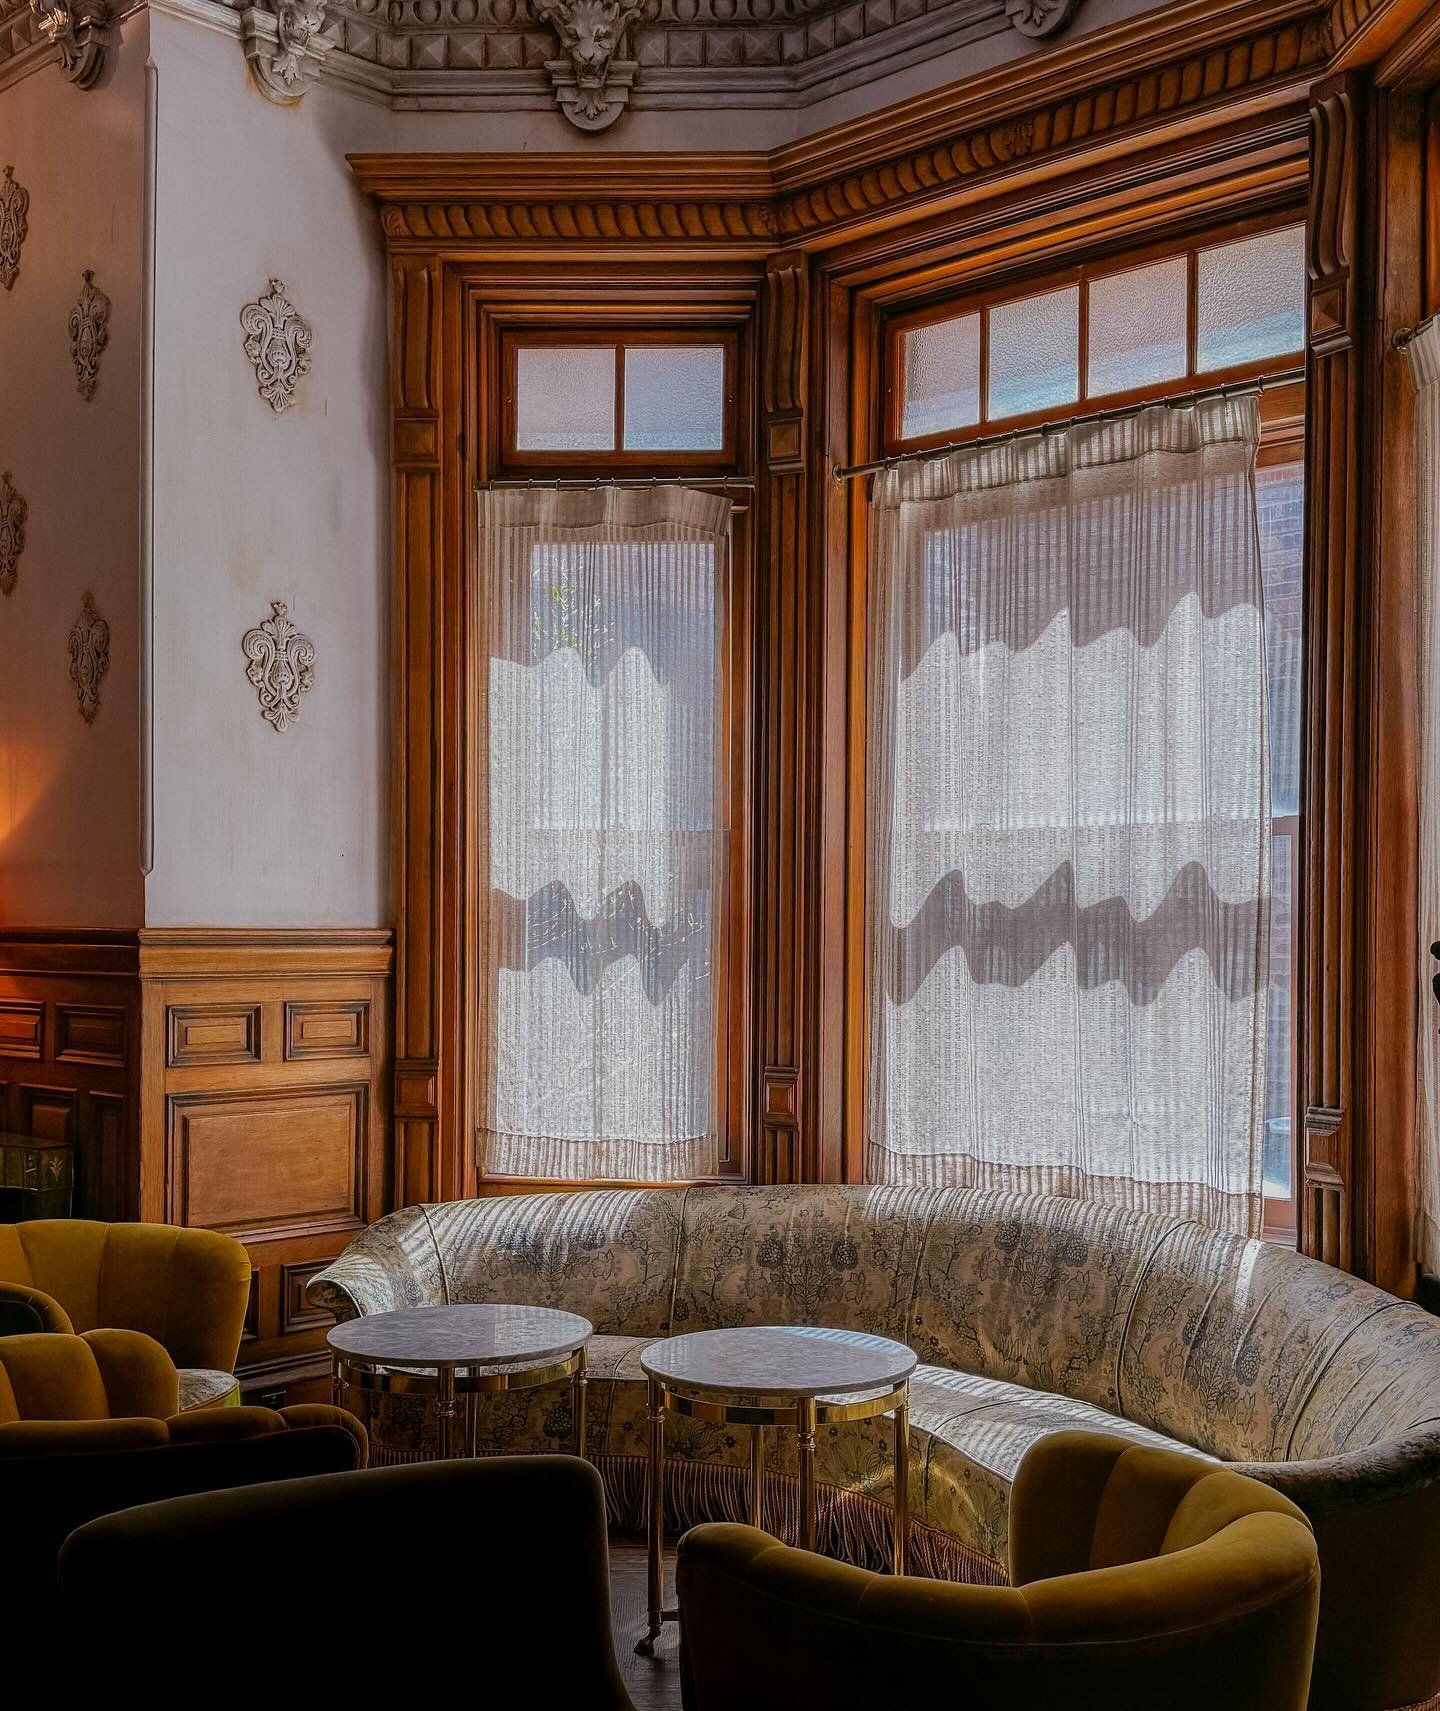 @hotelchelsea beauty in every corner. 

&quot;Built in the late 1800s, the Queen Anne building-turned-landmark hotel has welcomed guests and long-term residents like Mark Twain and Stanley Kubrick. It has been immortalized in songs, films, and books 